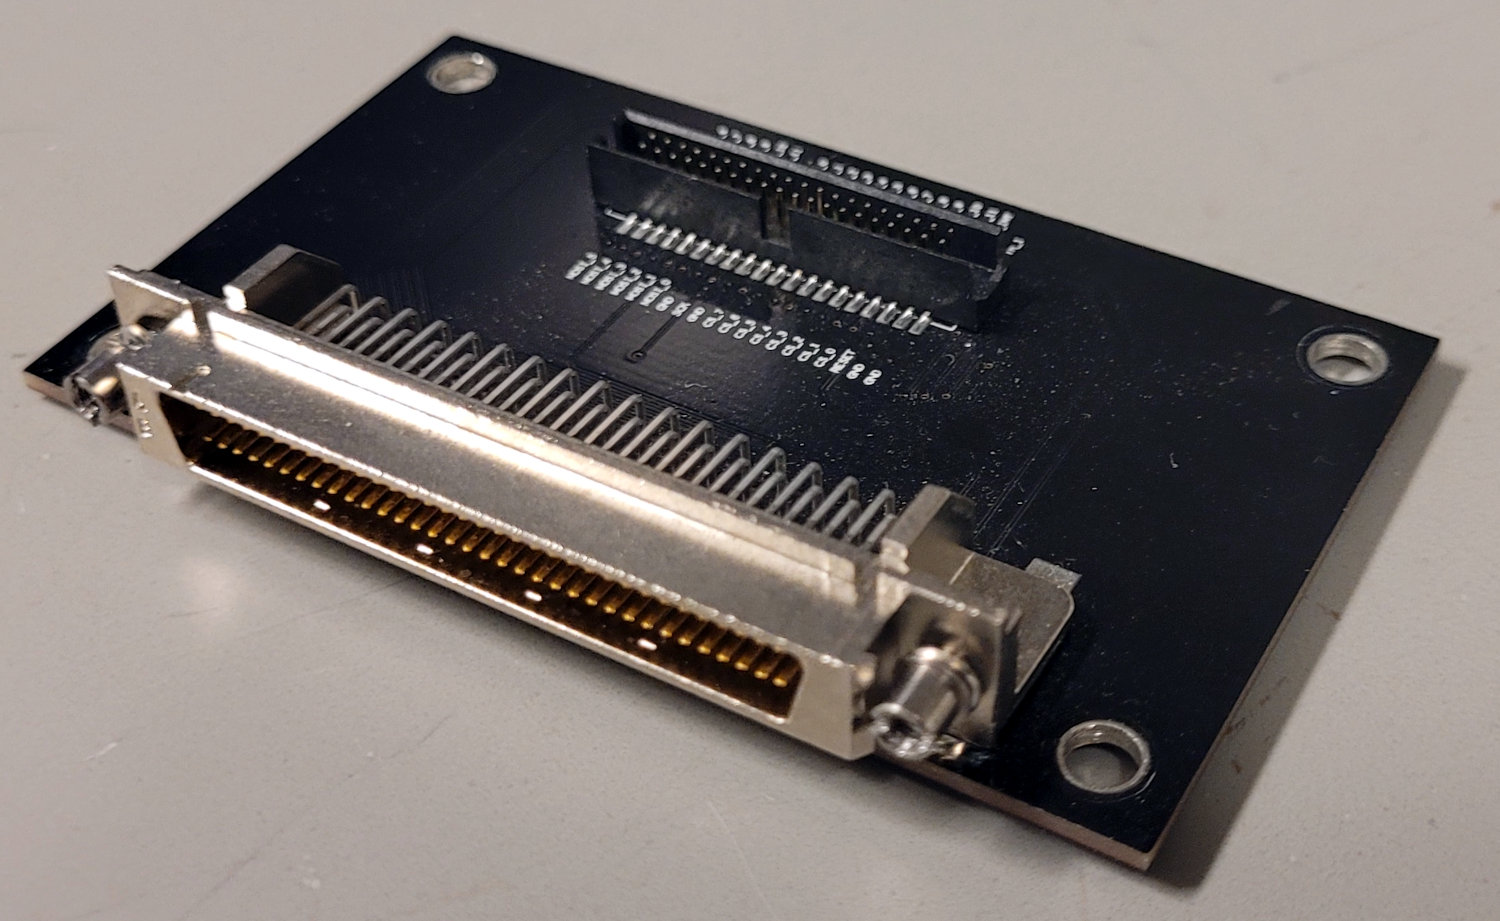 Assembled interconnect board